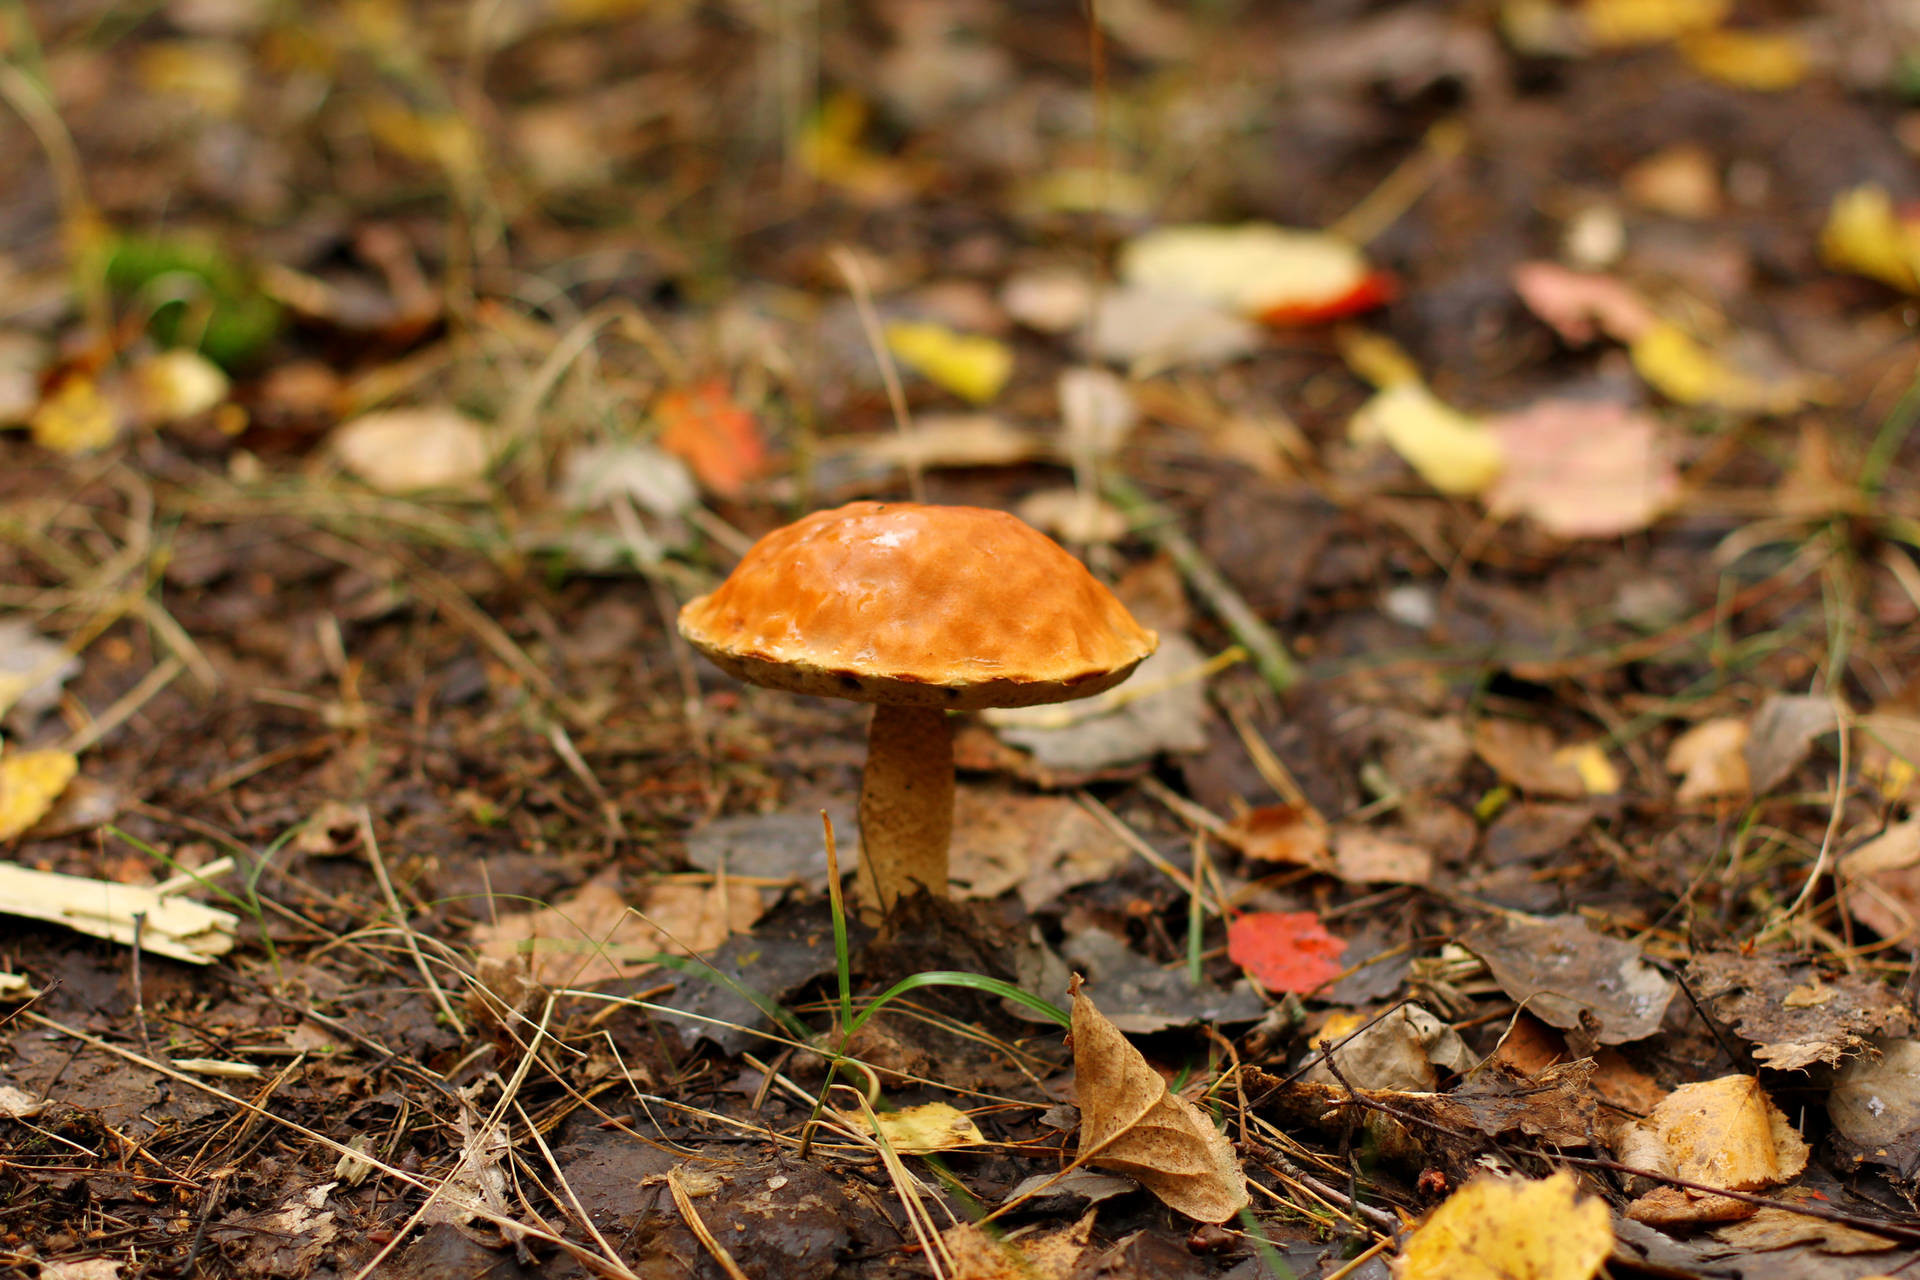 1920x1280 Download free image Mushroom in the forest in HD wallpaper size 1920px